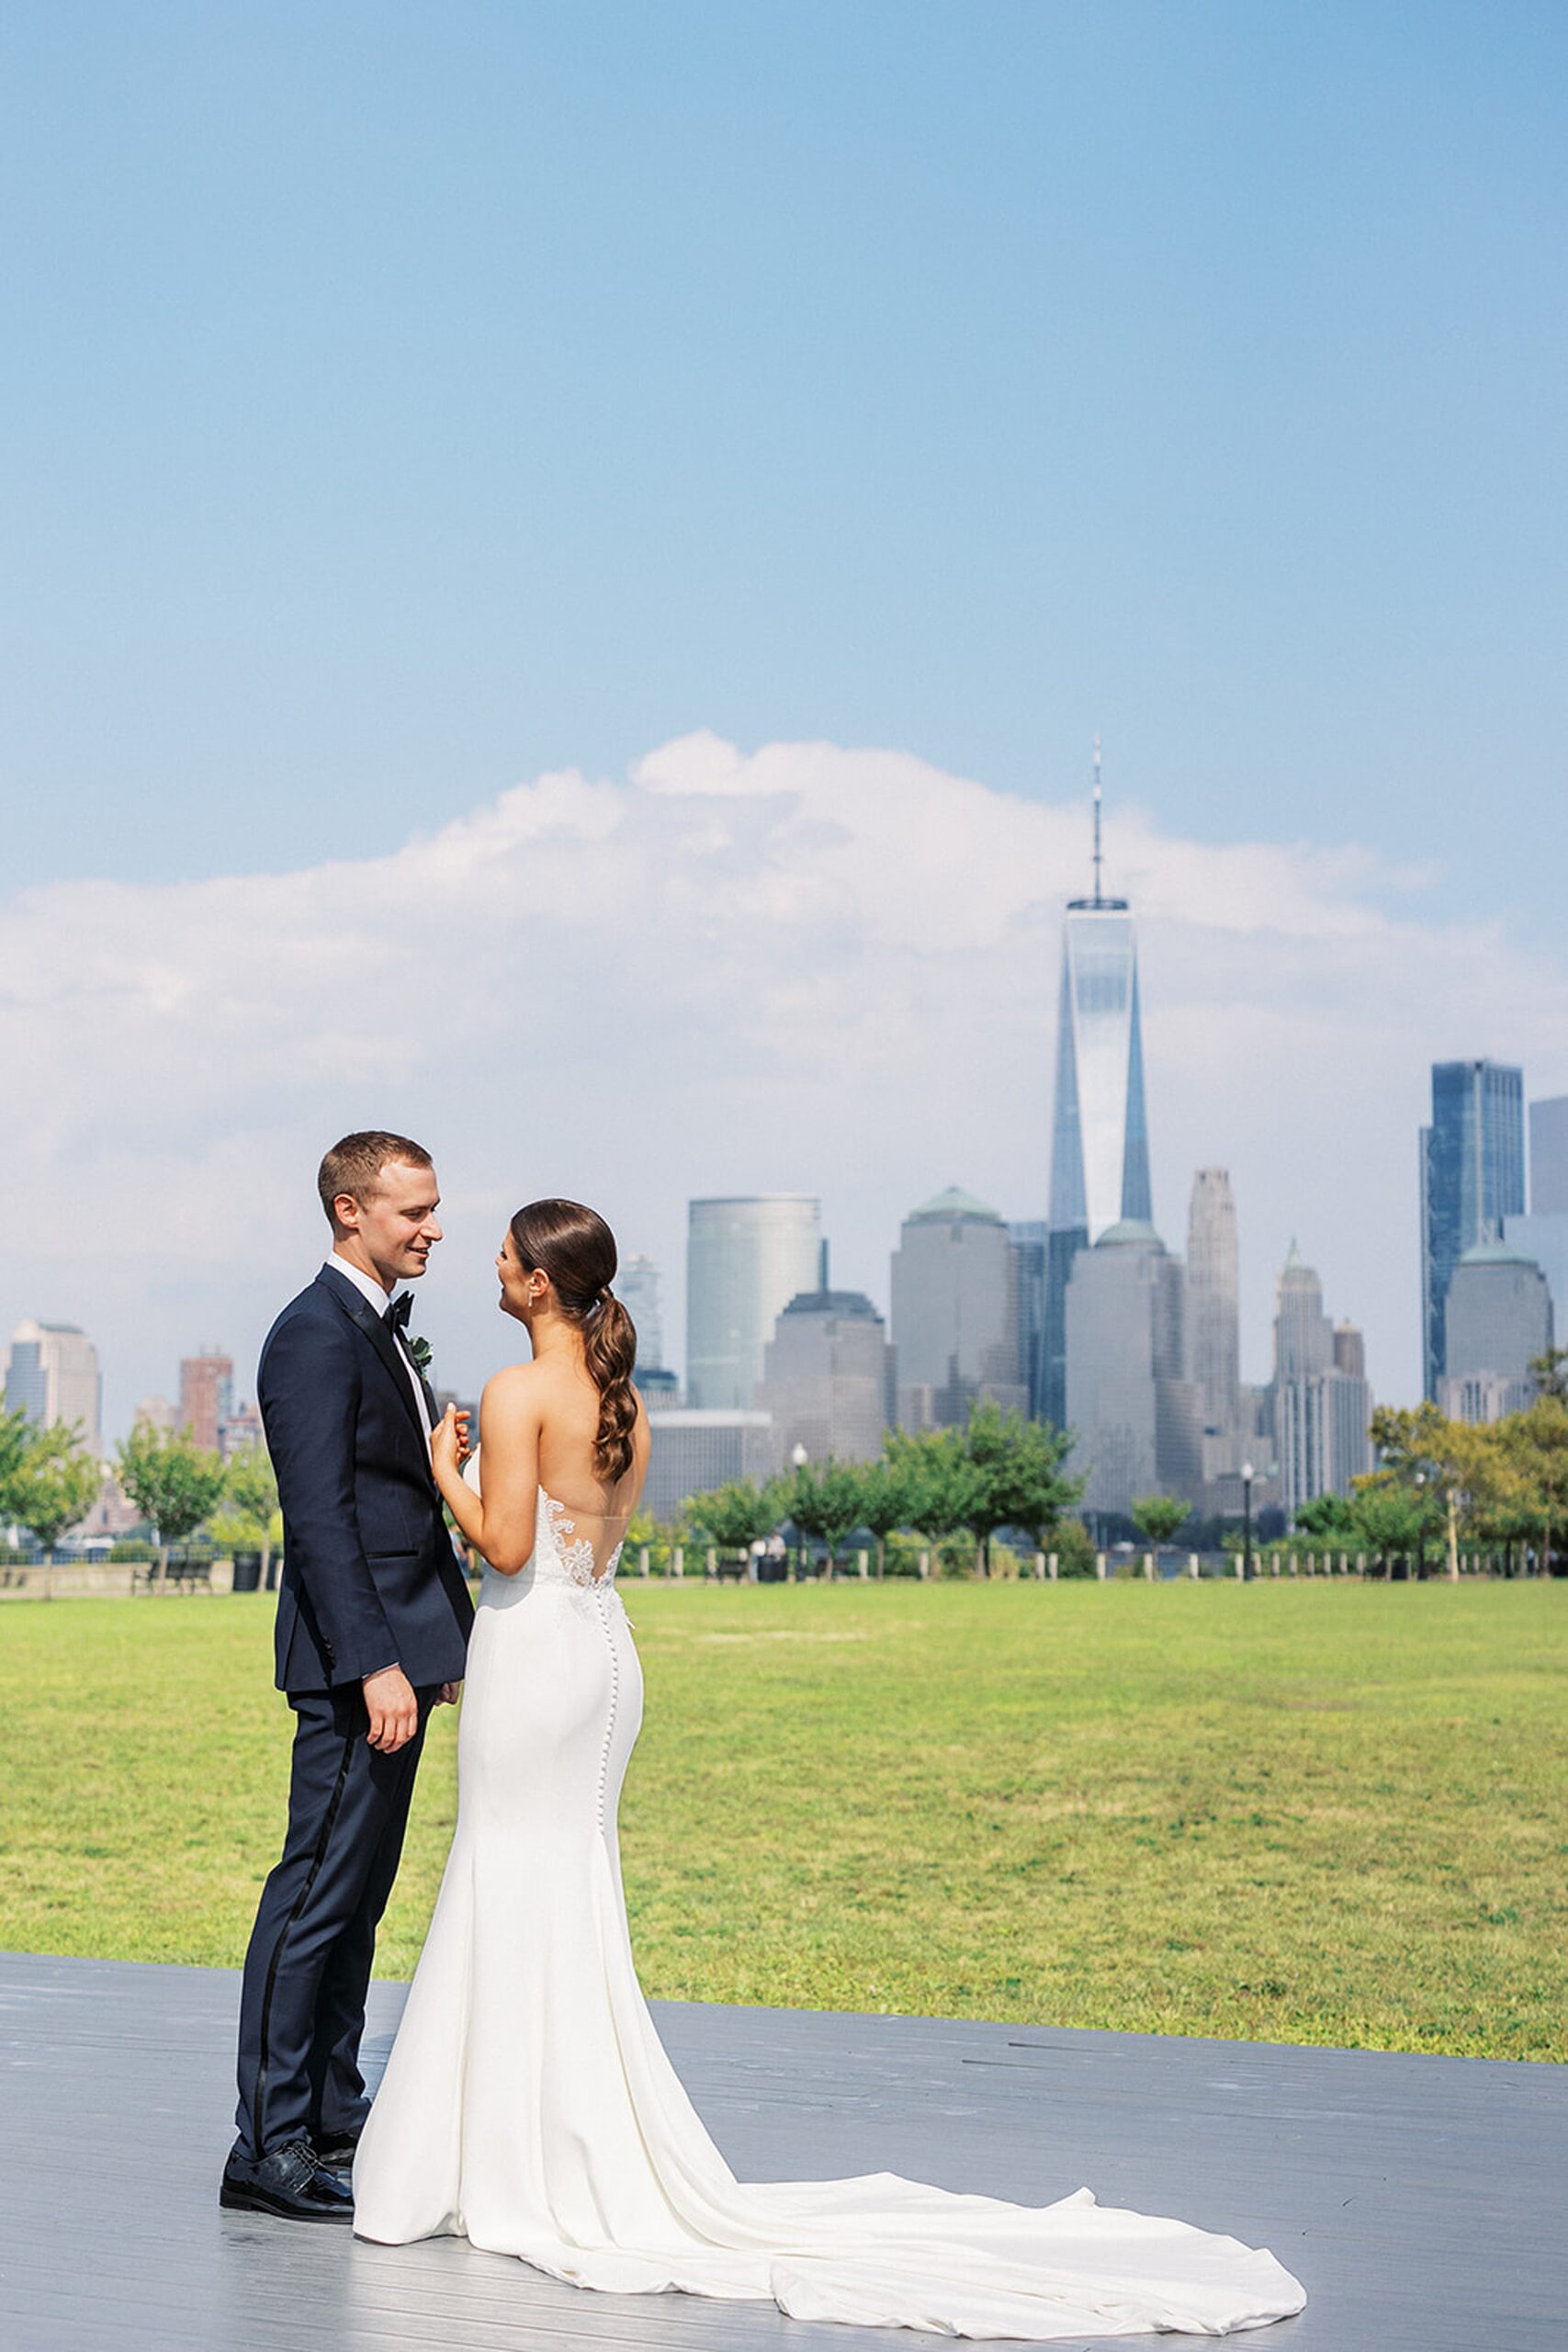 Newlyweds laugh and chat while looking out at the New York City Skyline